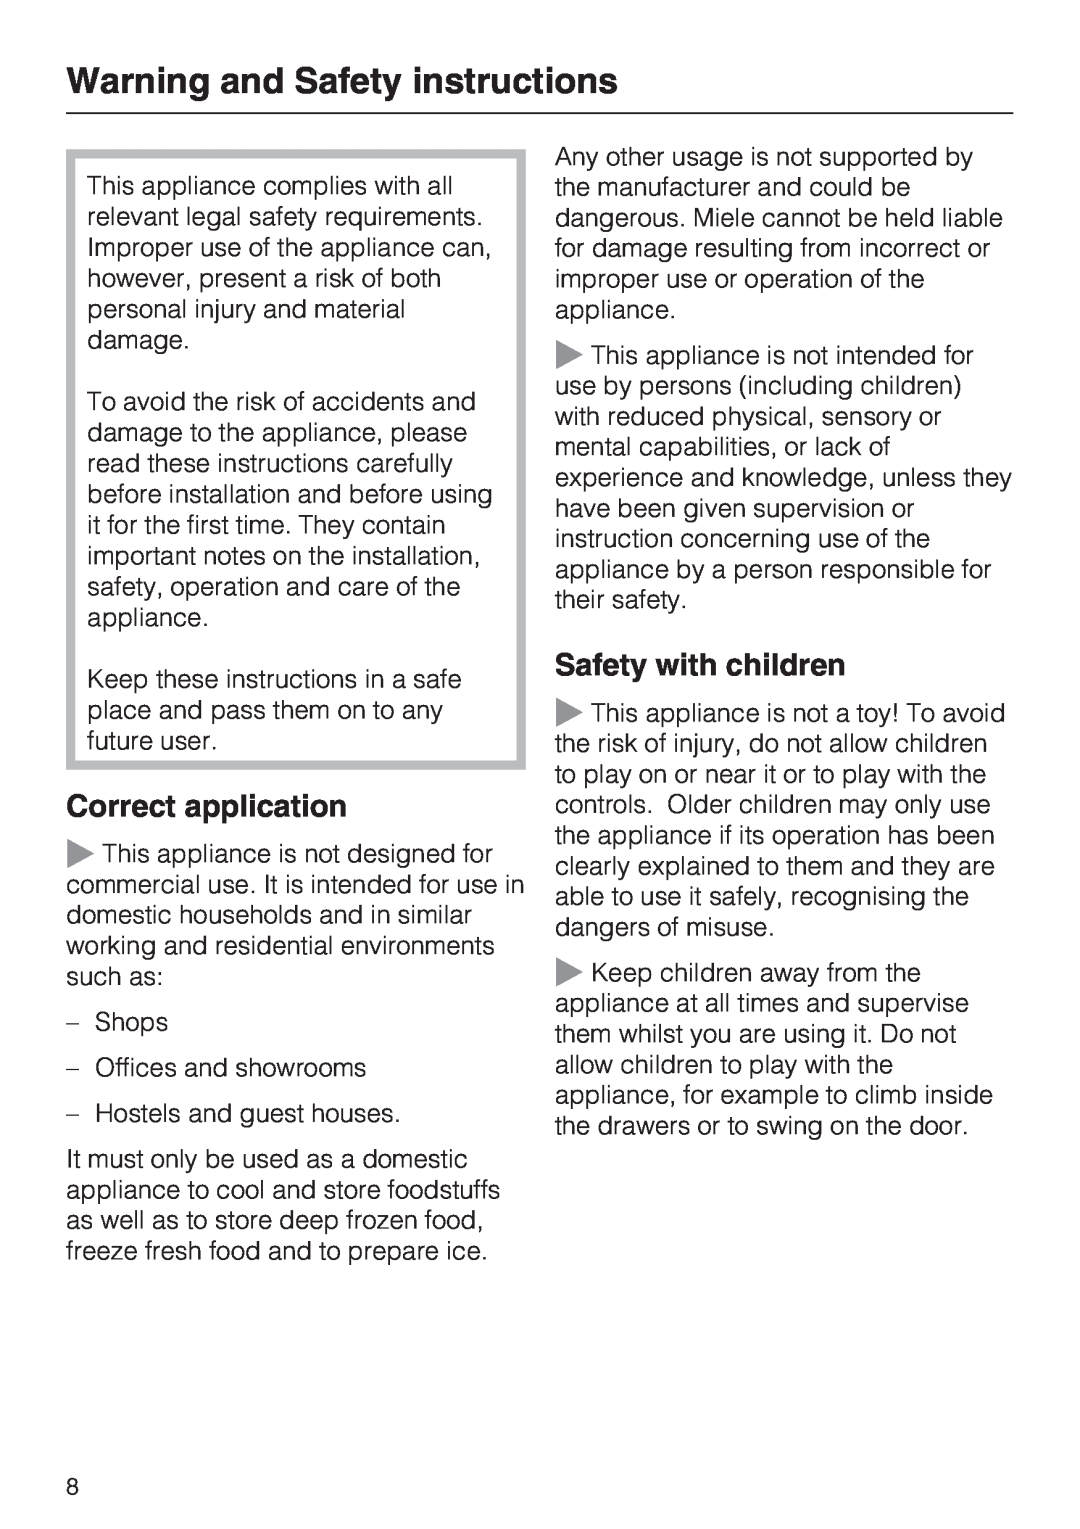 Miele KF 9757 ID installation instructions Warning and Safety instructions, Correct application, Safety with children 